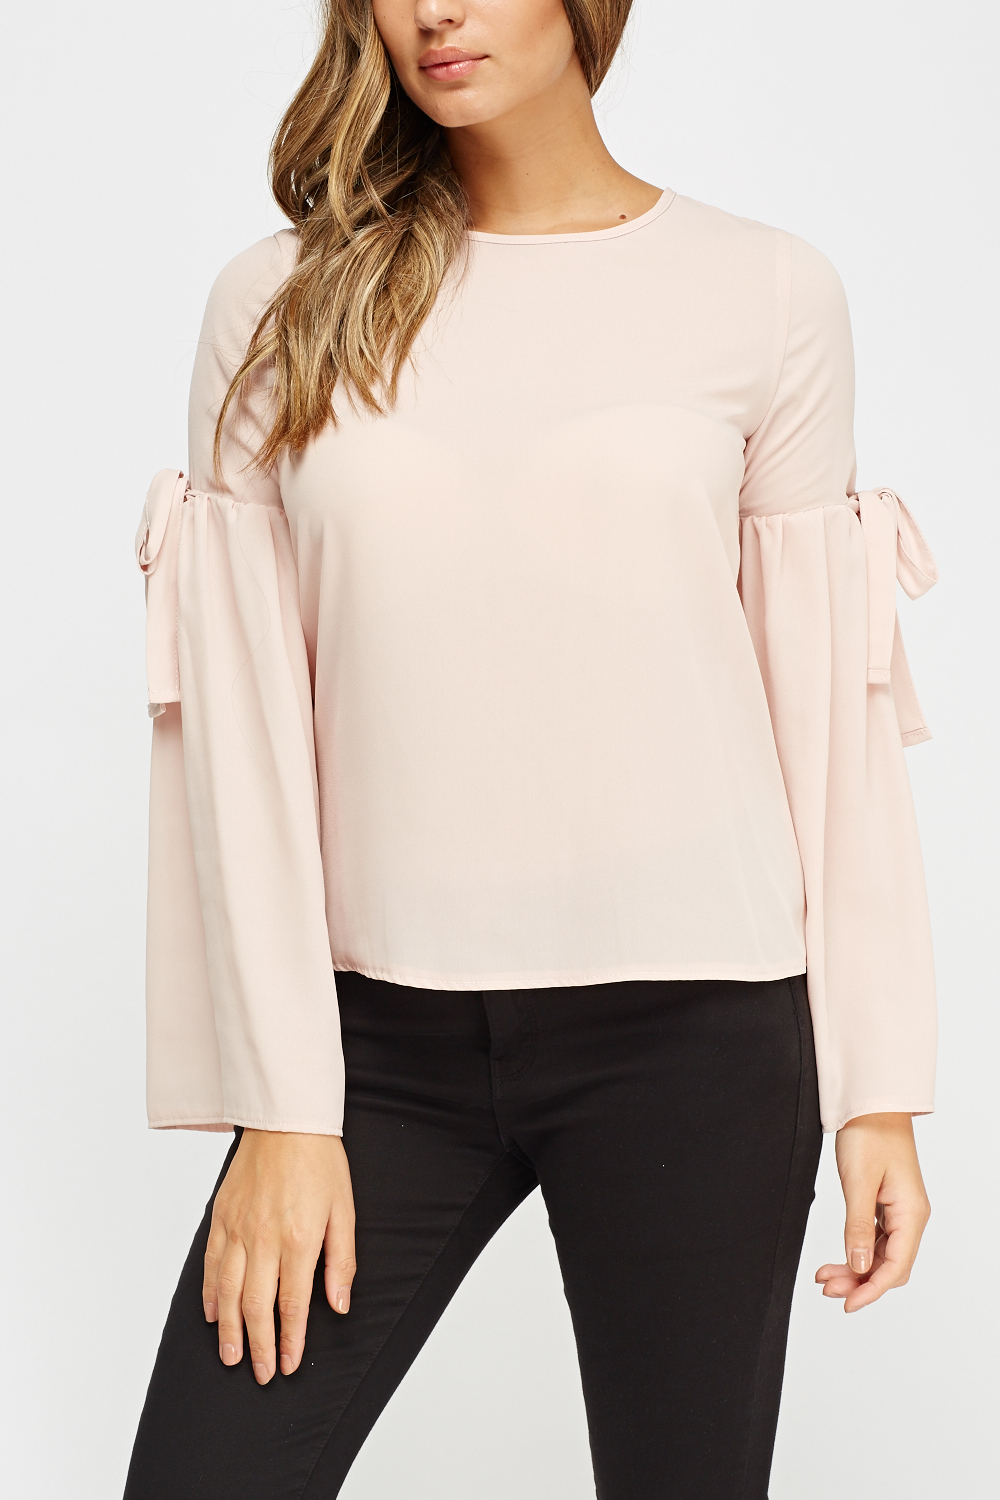 Flare Sleeve Light Pink Top - Just $7